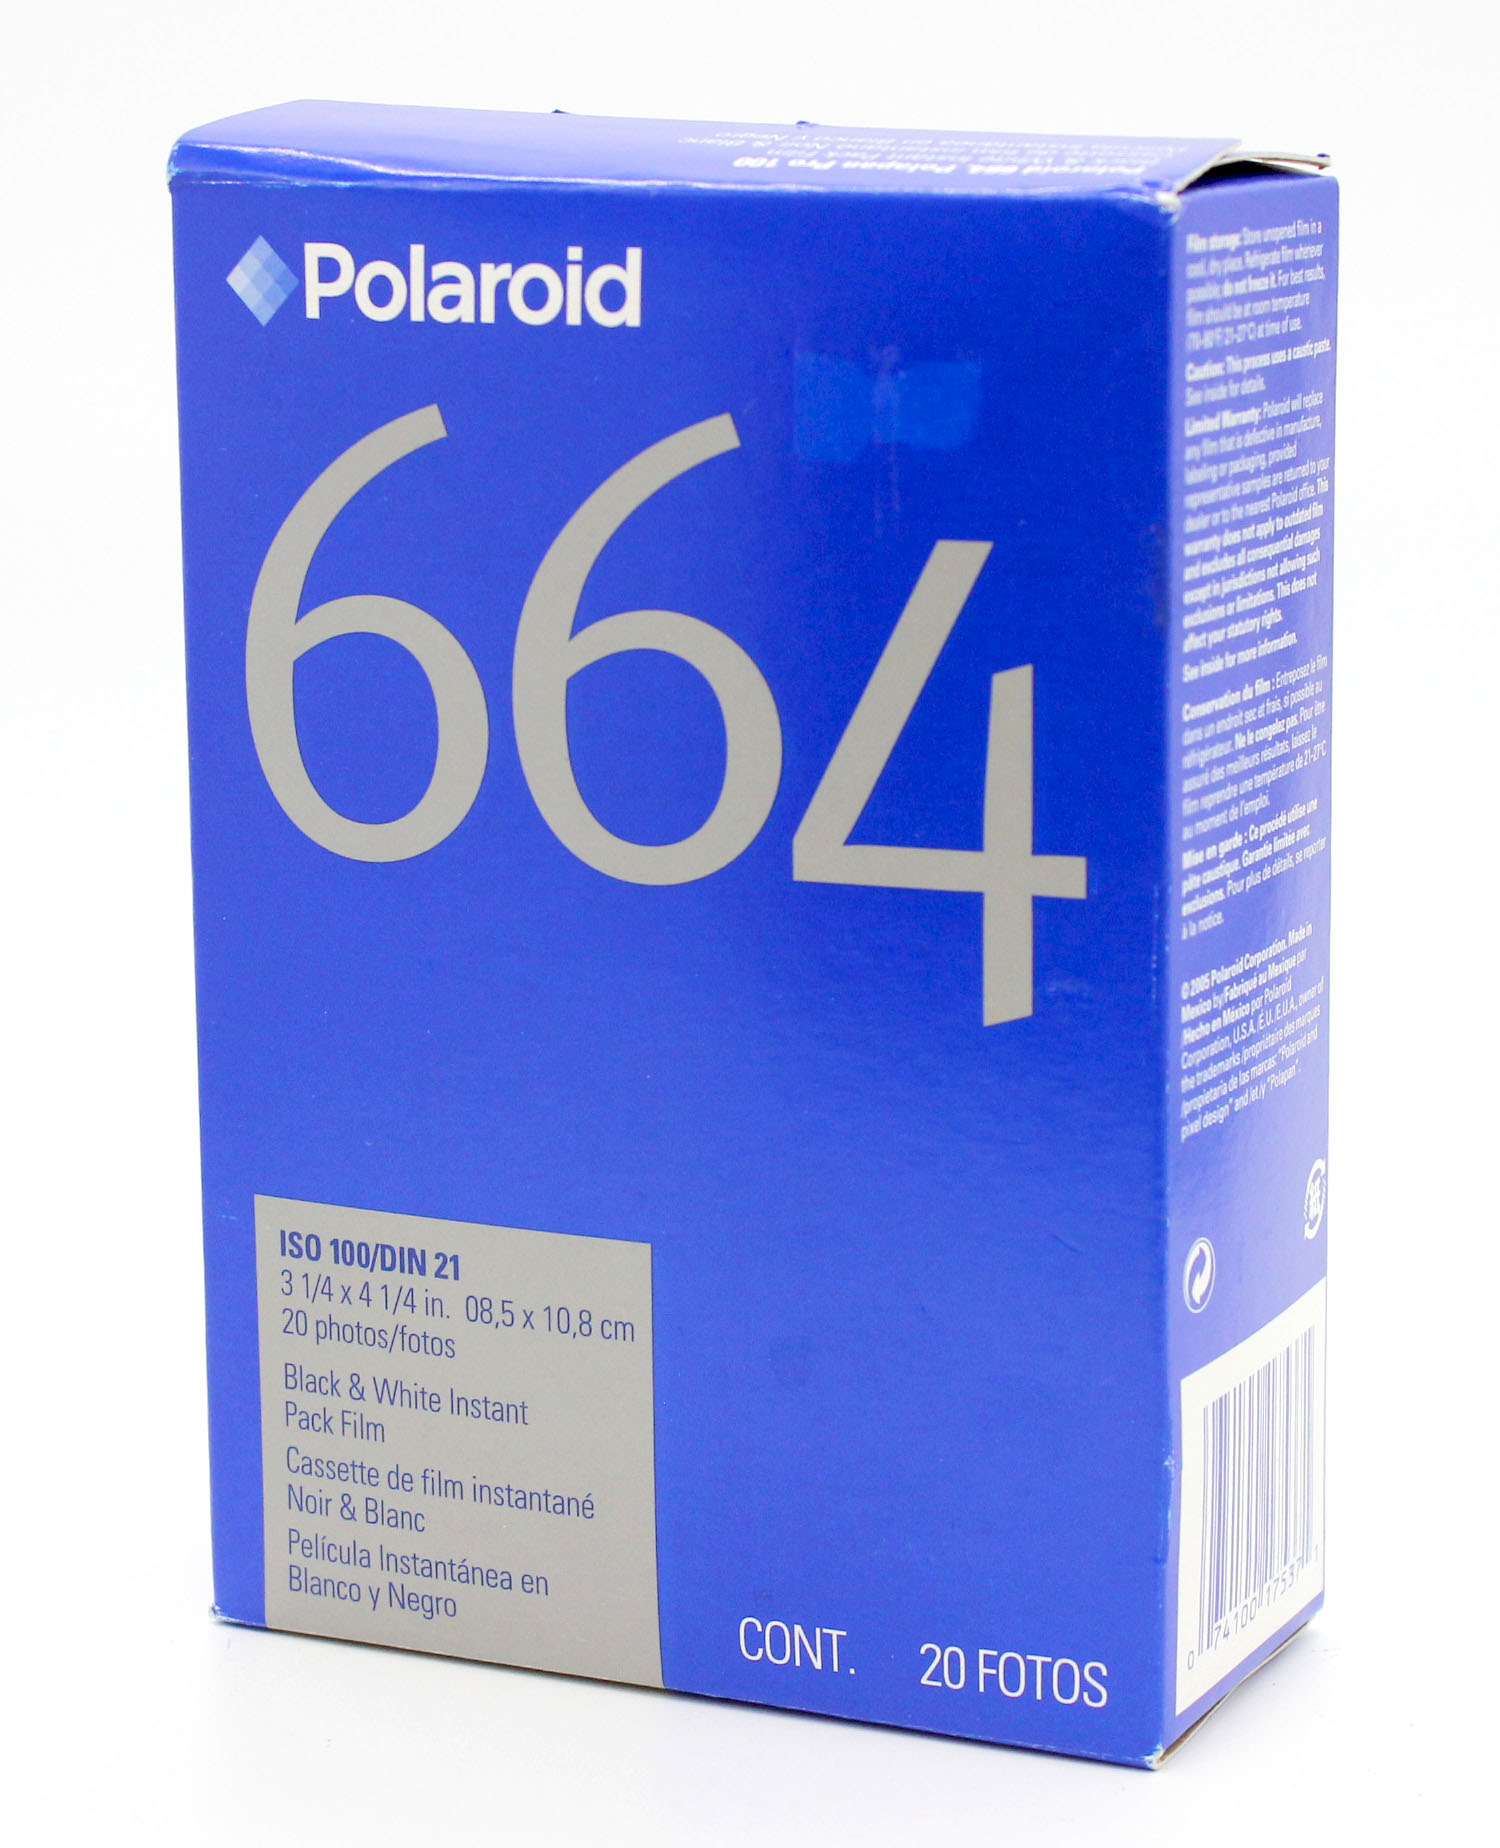 10x in 1 box Polaroid 665 P/N pack film in size 3.25x4.25 expired 